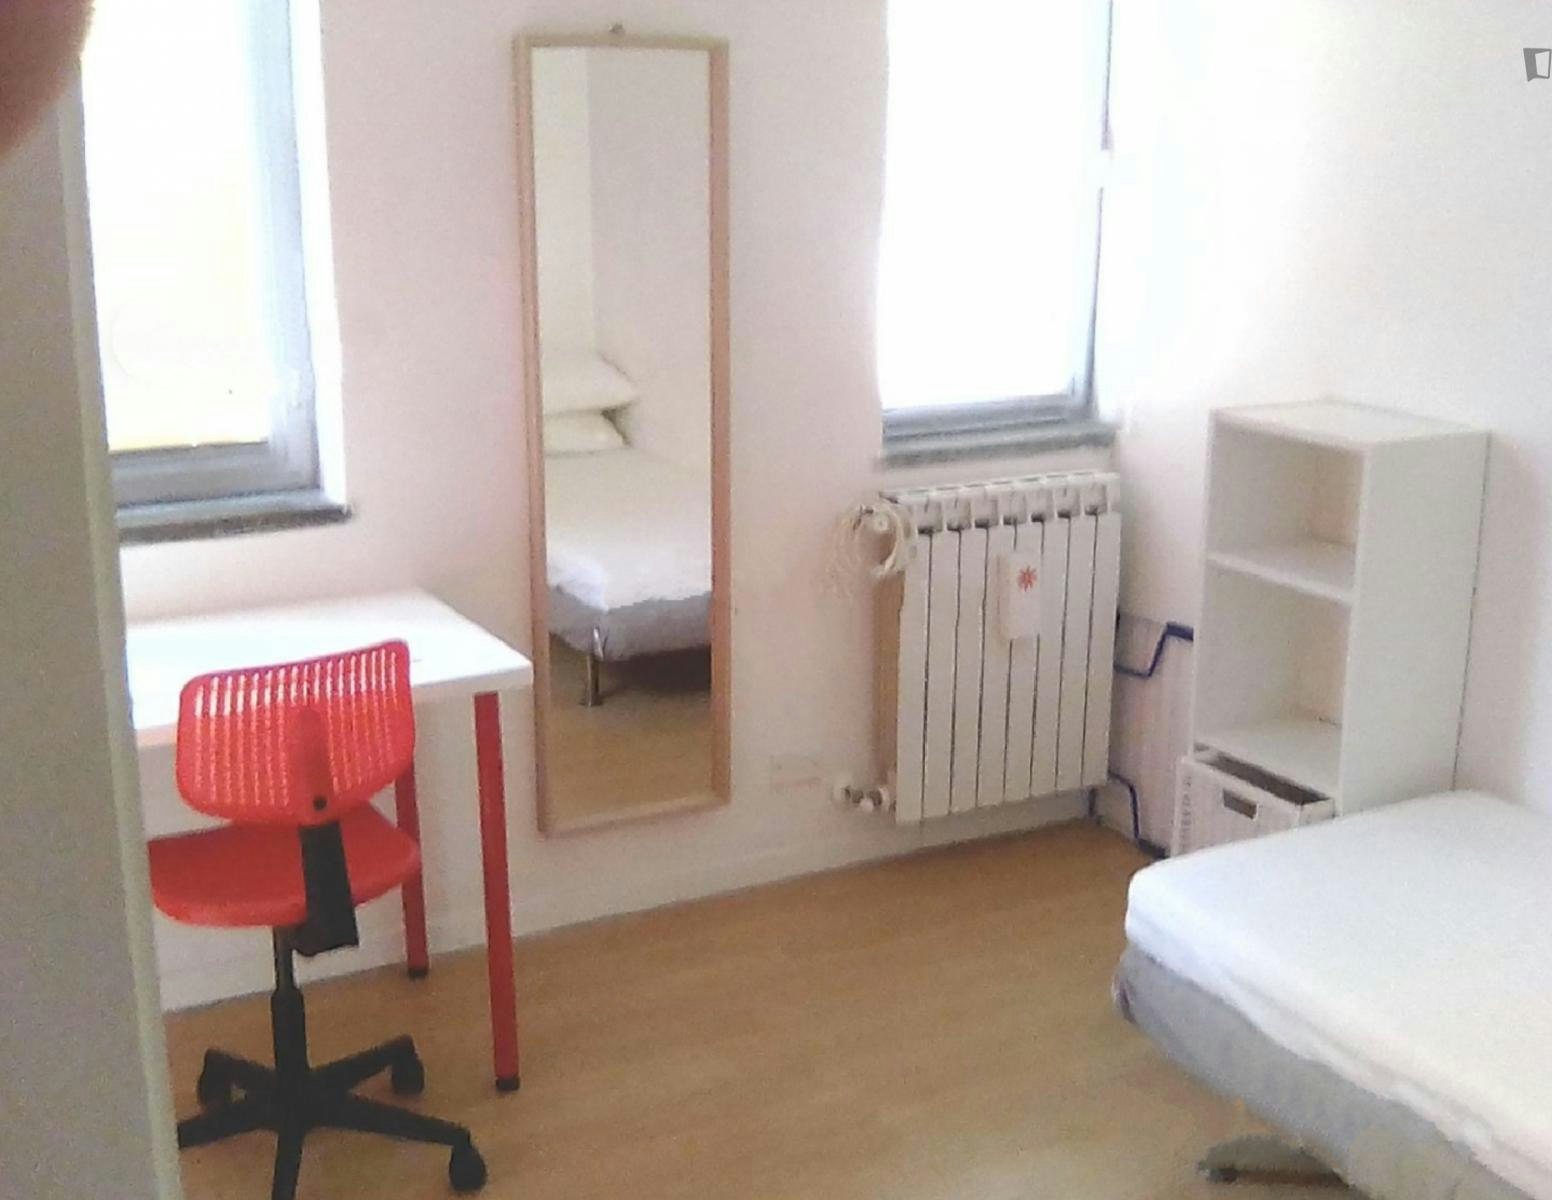 Lovely single bedroom close to the University of Study of L'Aquila